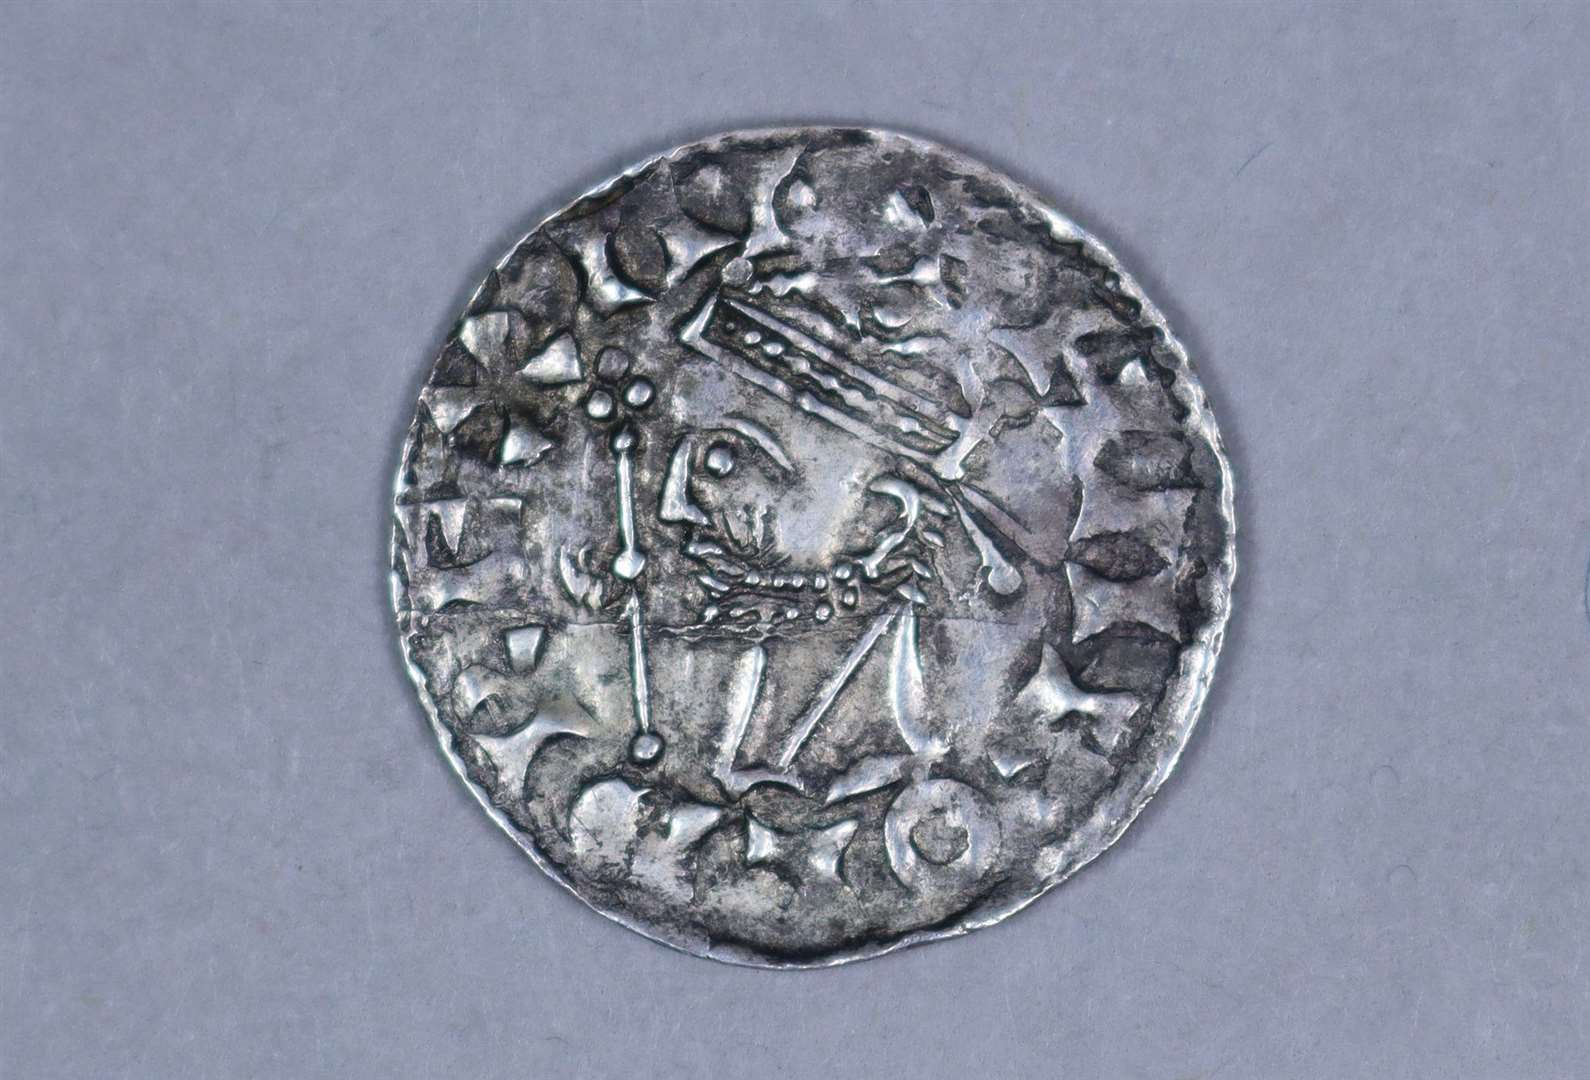 A coin minted in 1066 for King Harold II